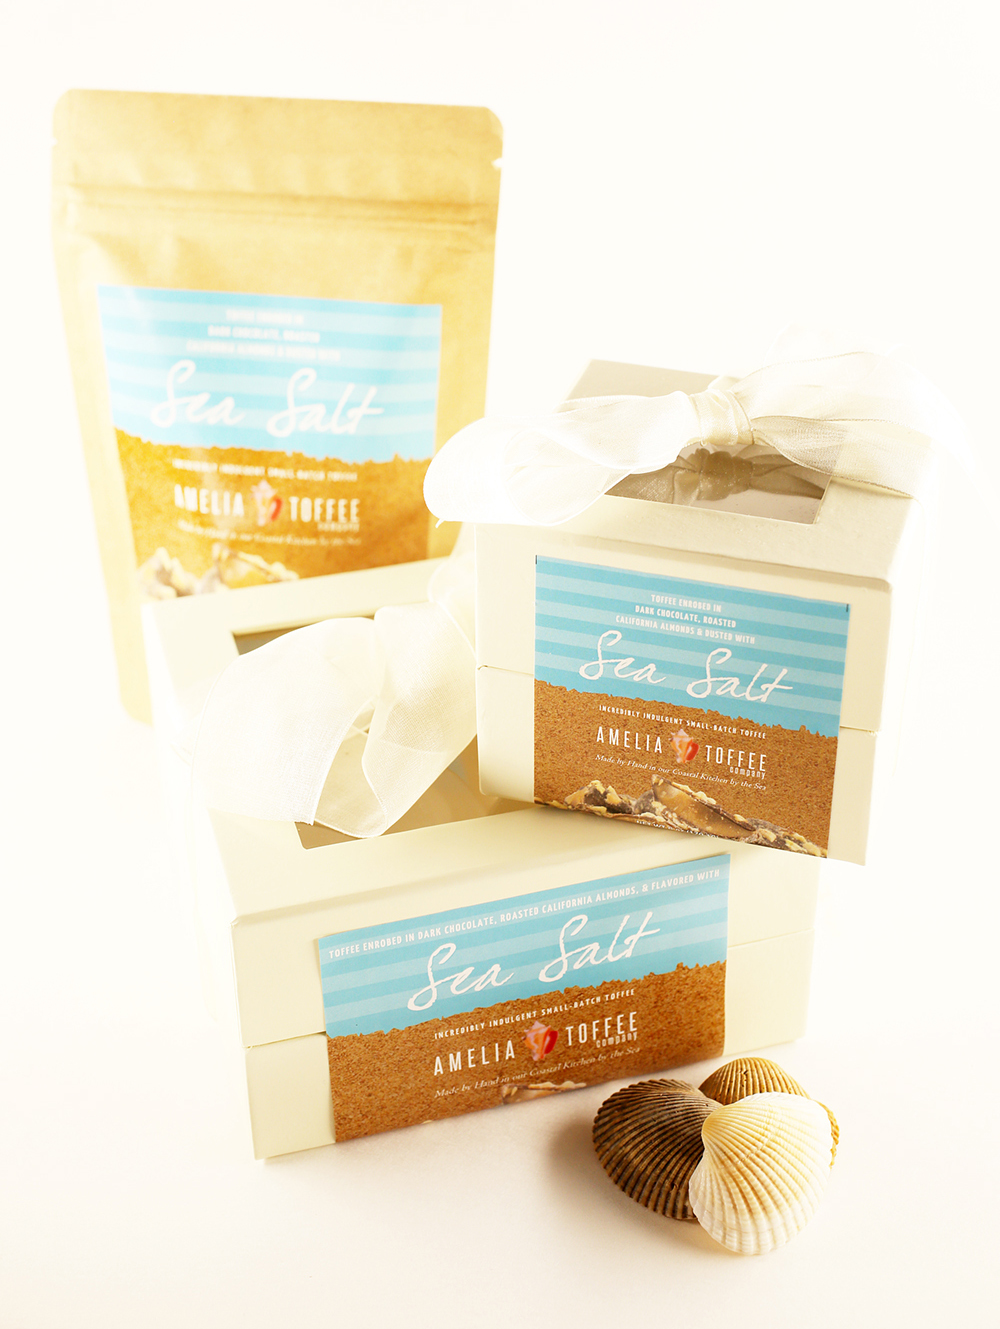 Amelia Toffee Co. sells toffee in Whole Foods Market, Bealls and Lucky’s Market.